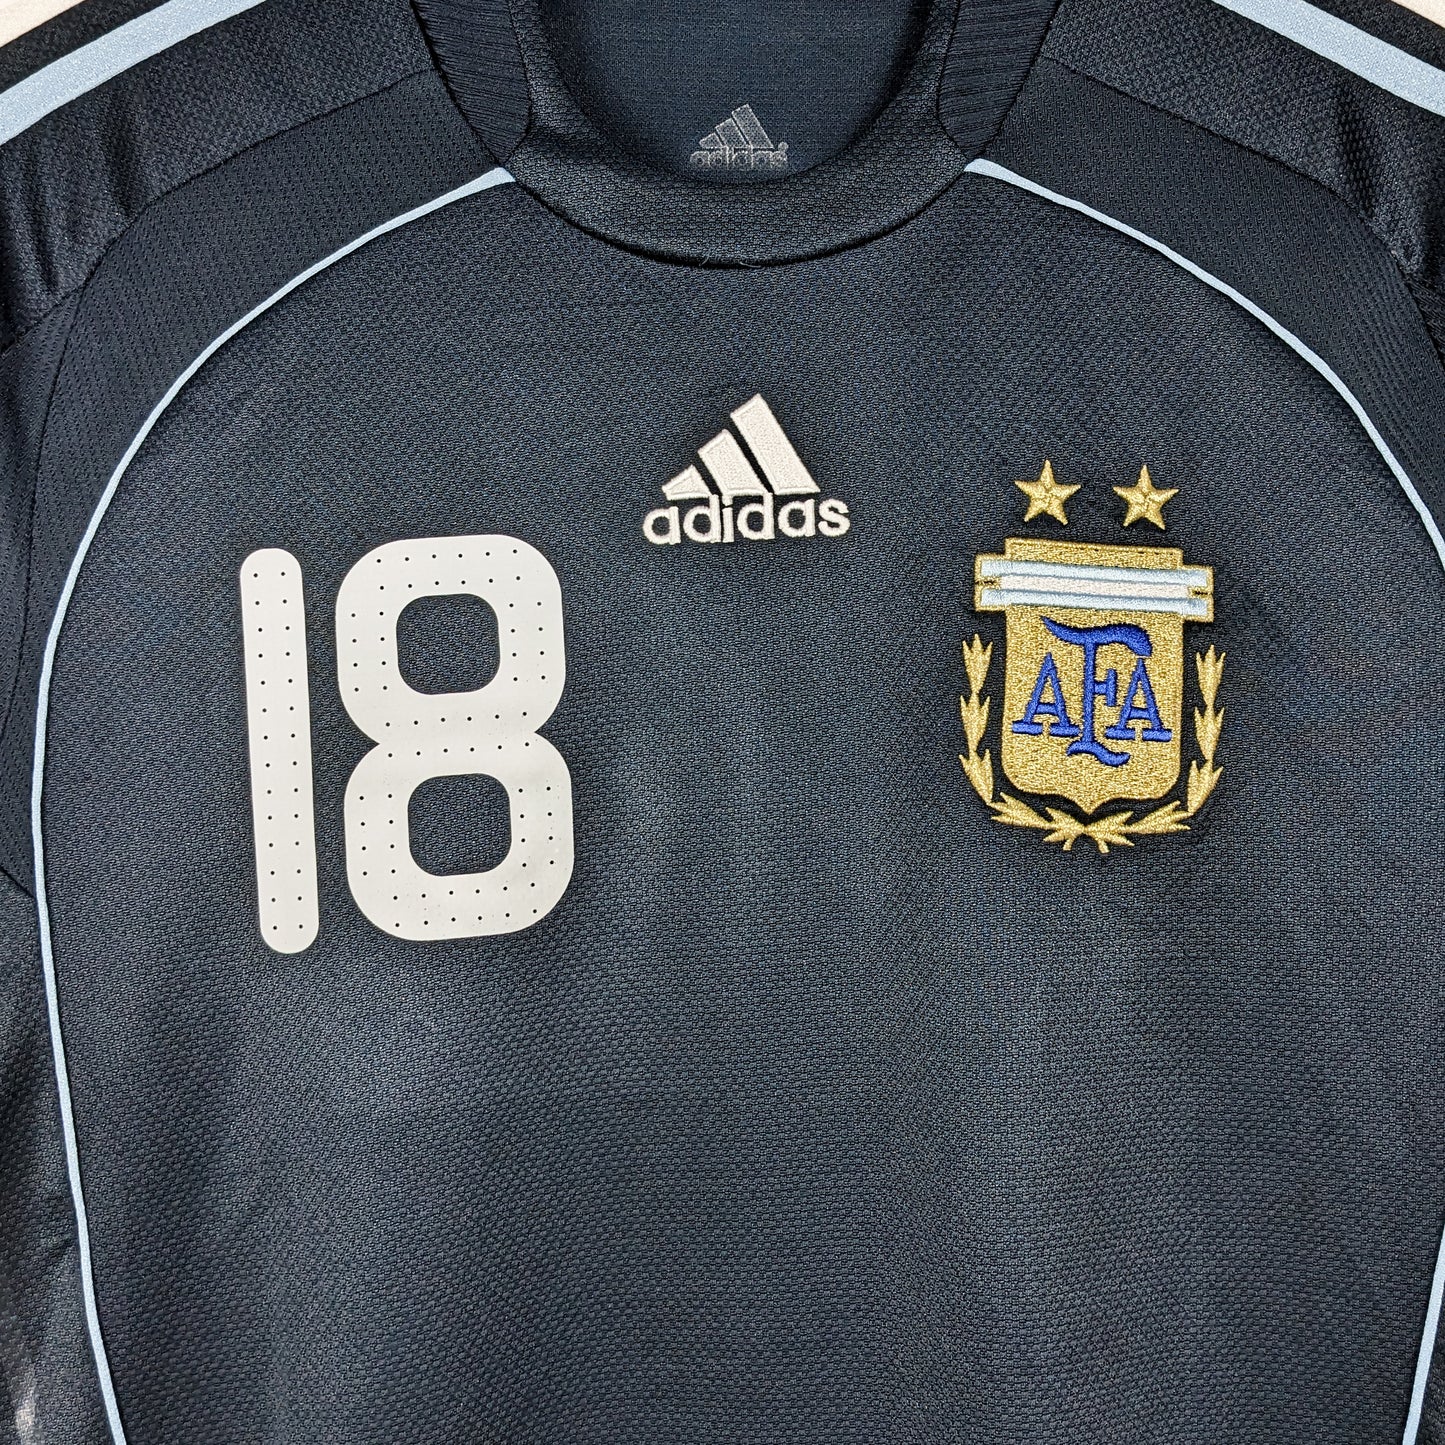 Authentic Argentina 2008 Away - Messi #10 Size M